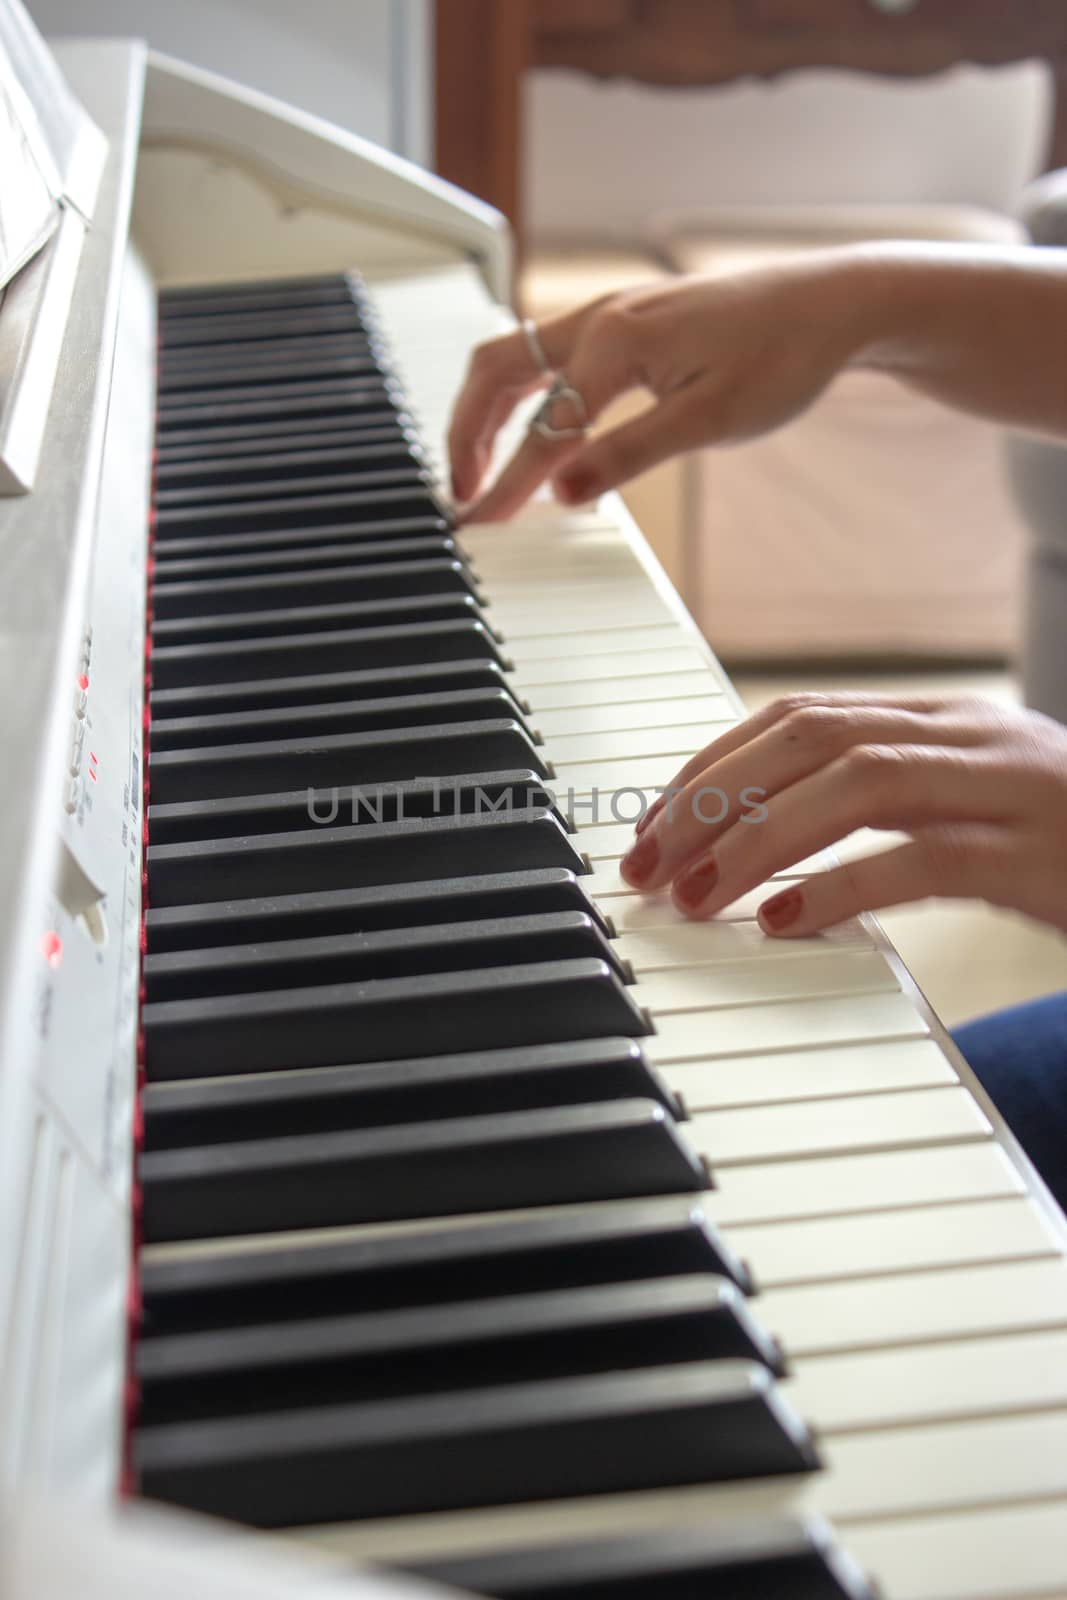 Woman practicing lessons on her white electric piano